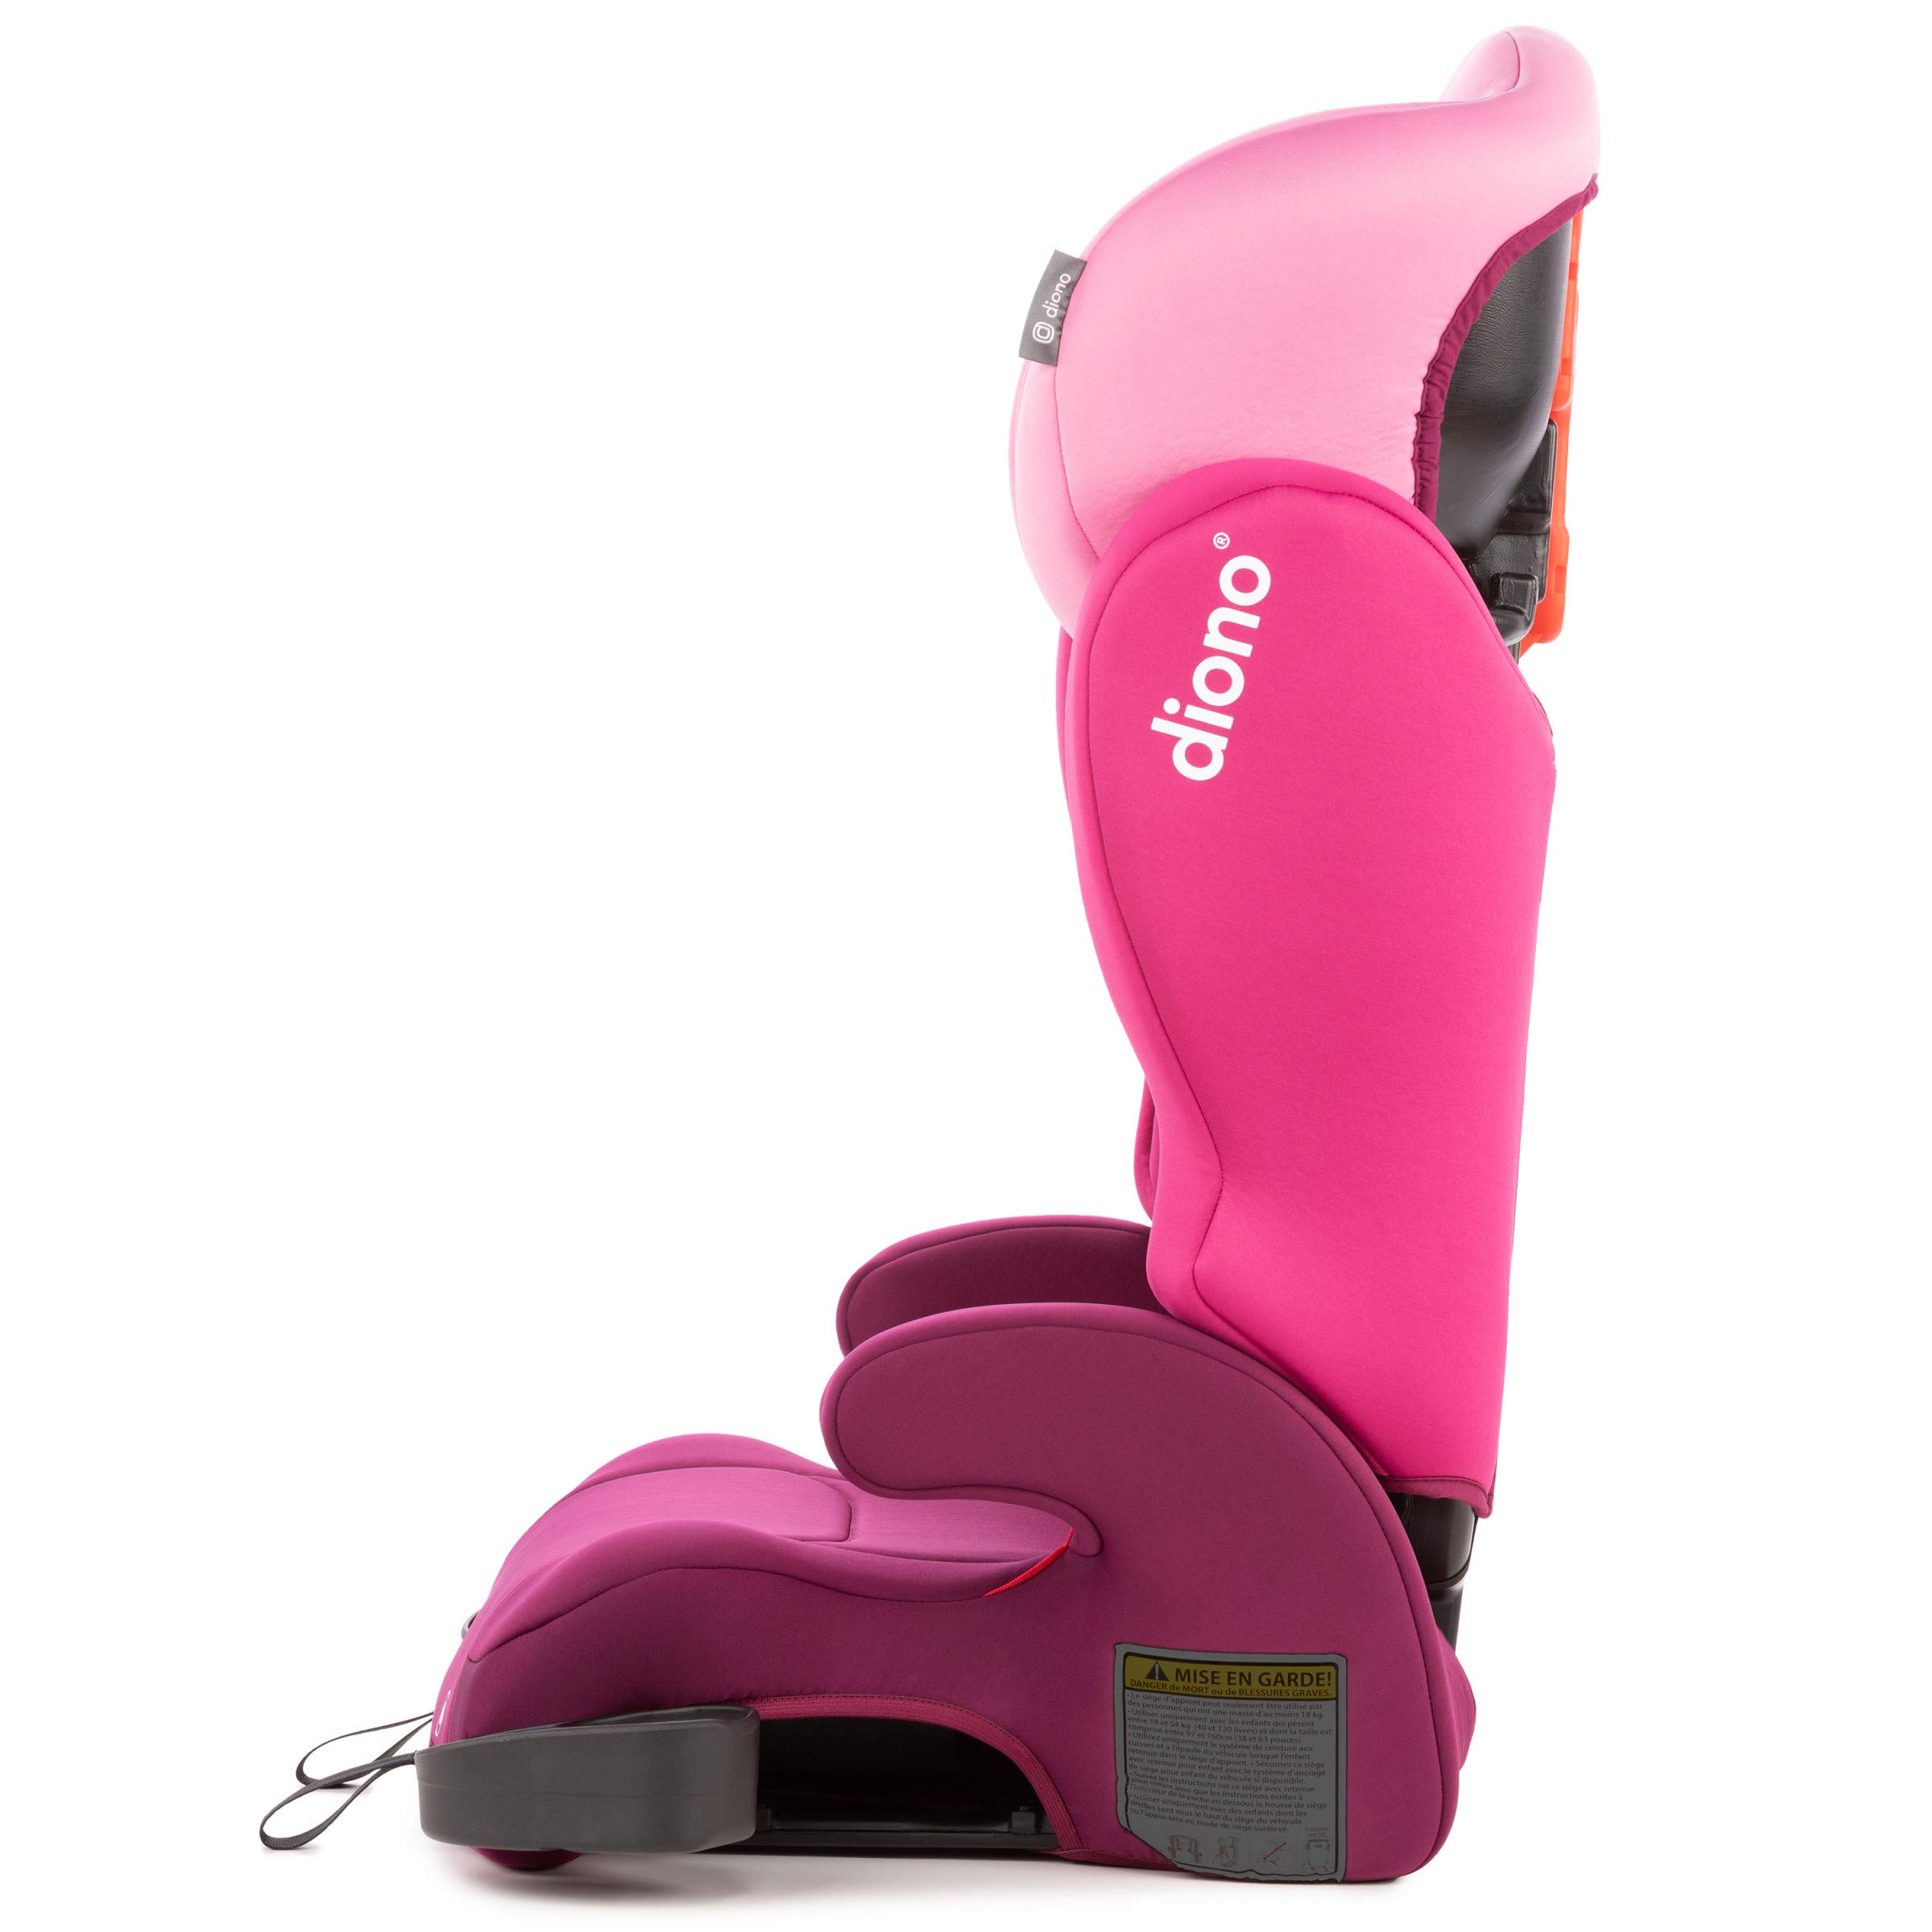 Diono Cambria 2 XL 2022, Dual Latch Connectors, 2-in-1 Belt Positioning Booster Seat, High-Back to Backless Booster with Space and Room to Grow, 8 Years 1 Booster Seat, Pink